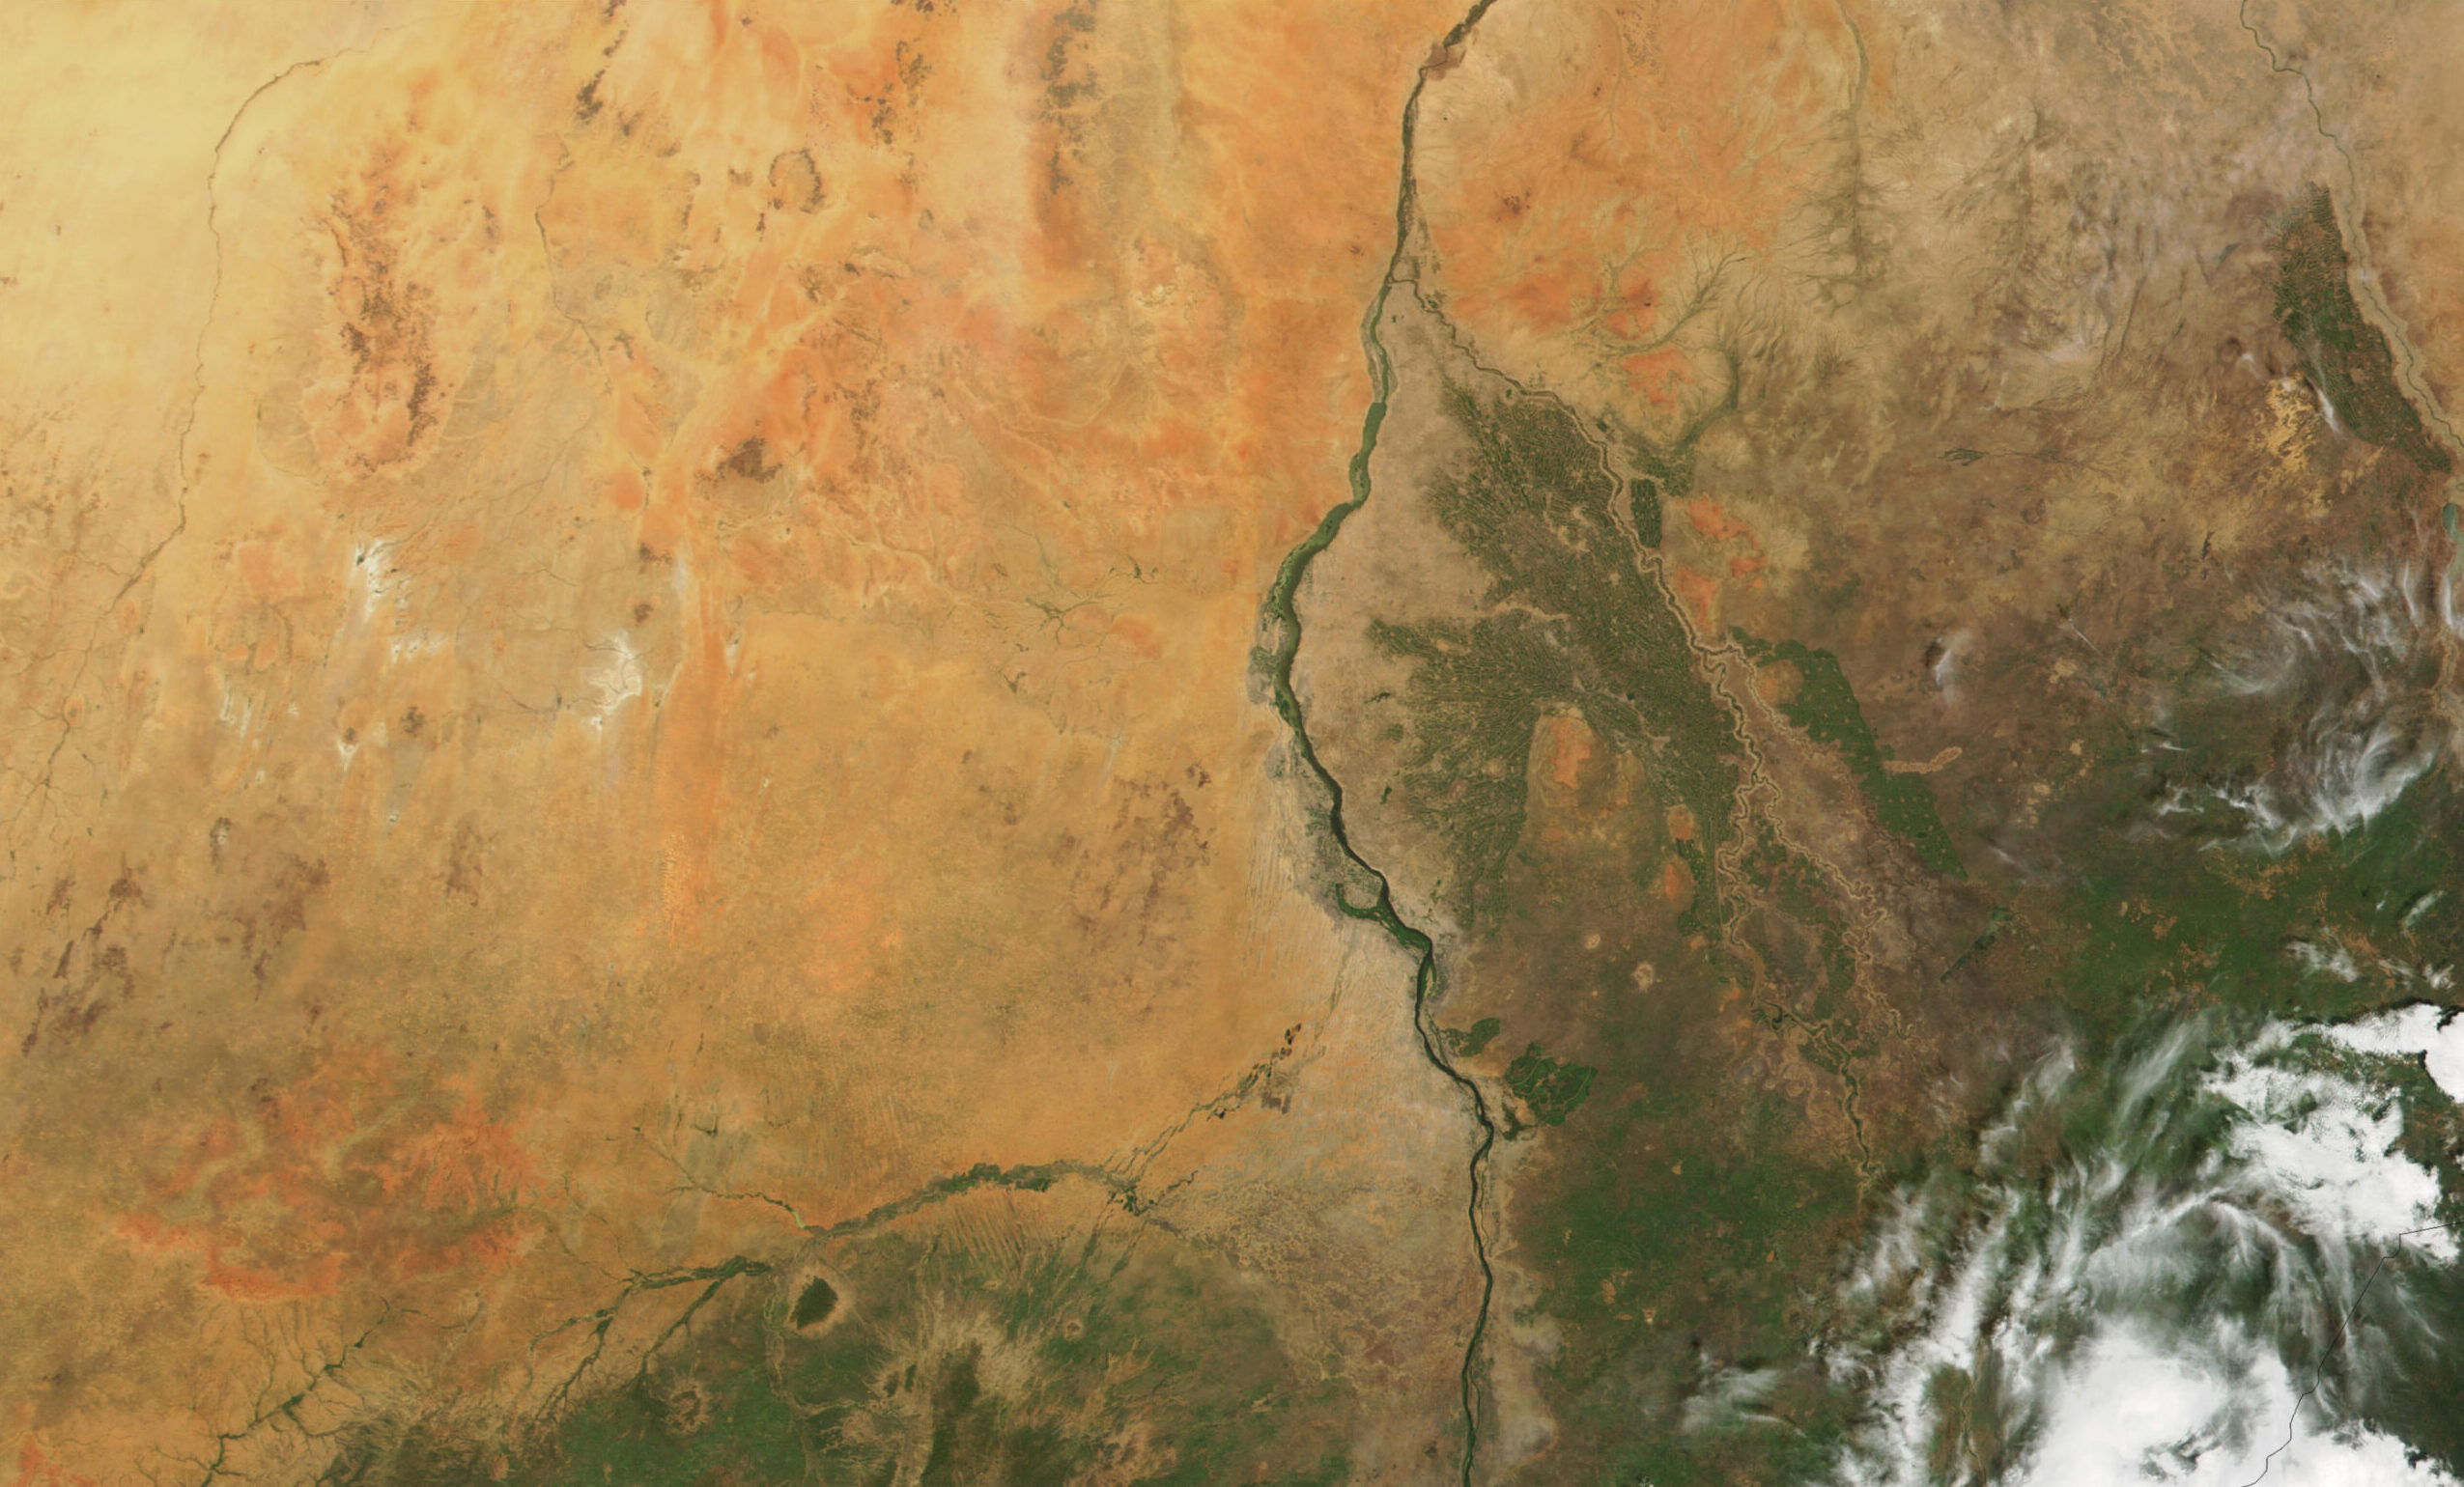 Image of the Nile River in Sudan taken from space.